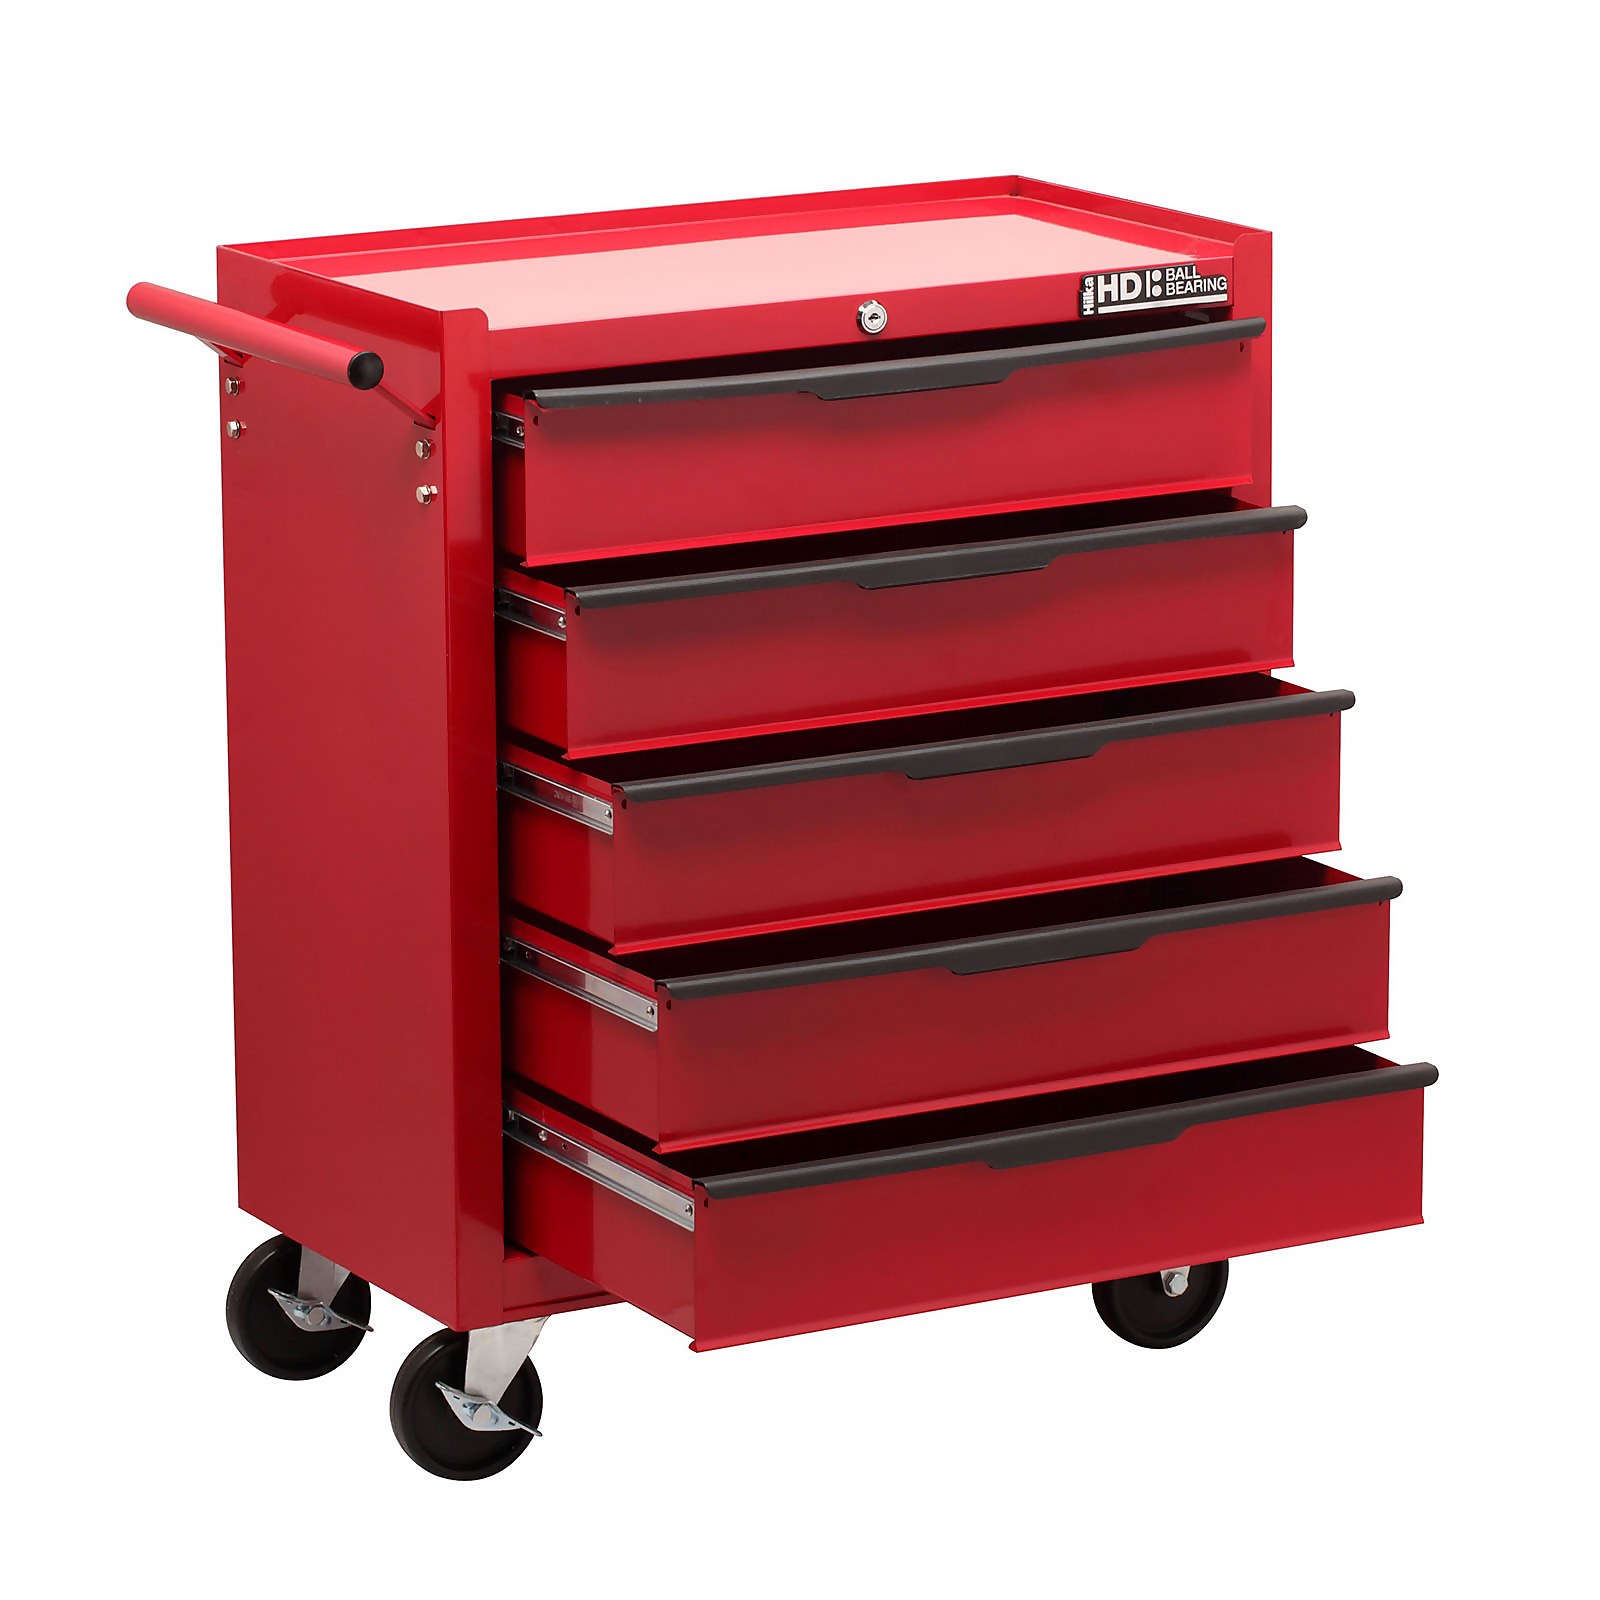 Hilka Heavy Duty 5 Drawer Tool Storage Trolley with Ball Bearing Slides